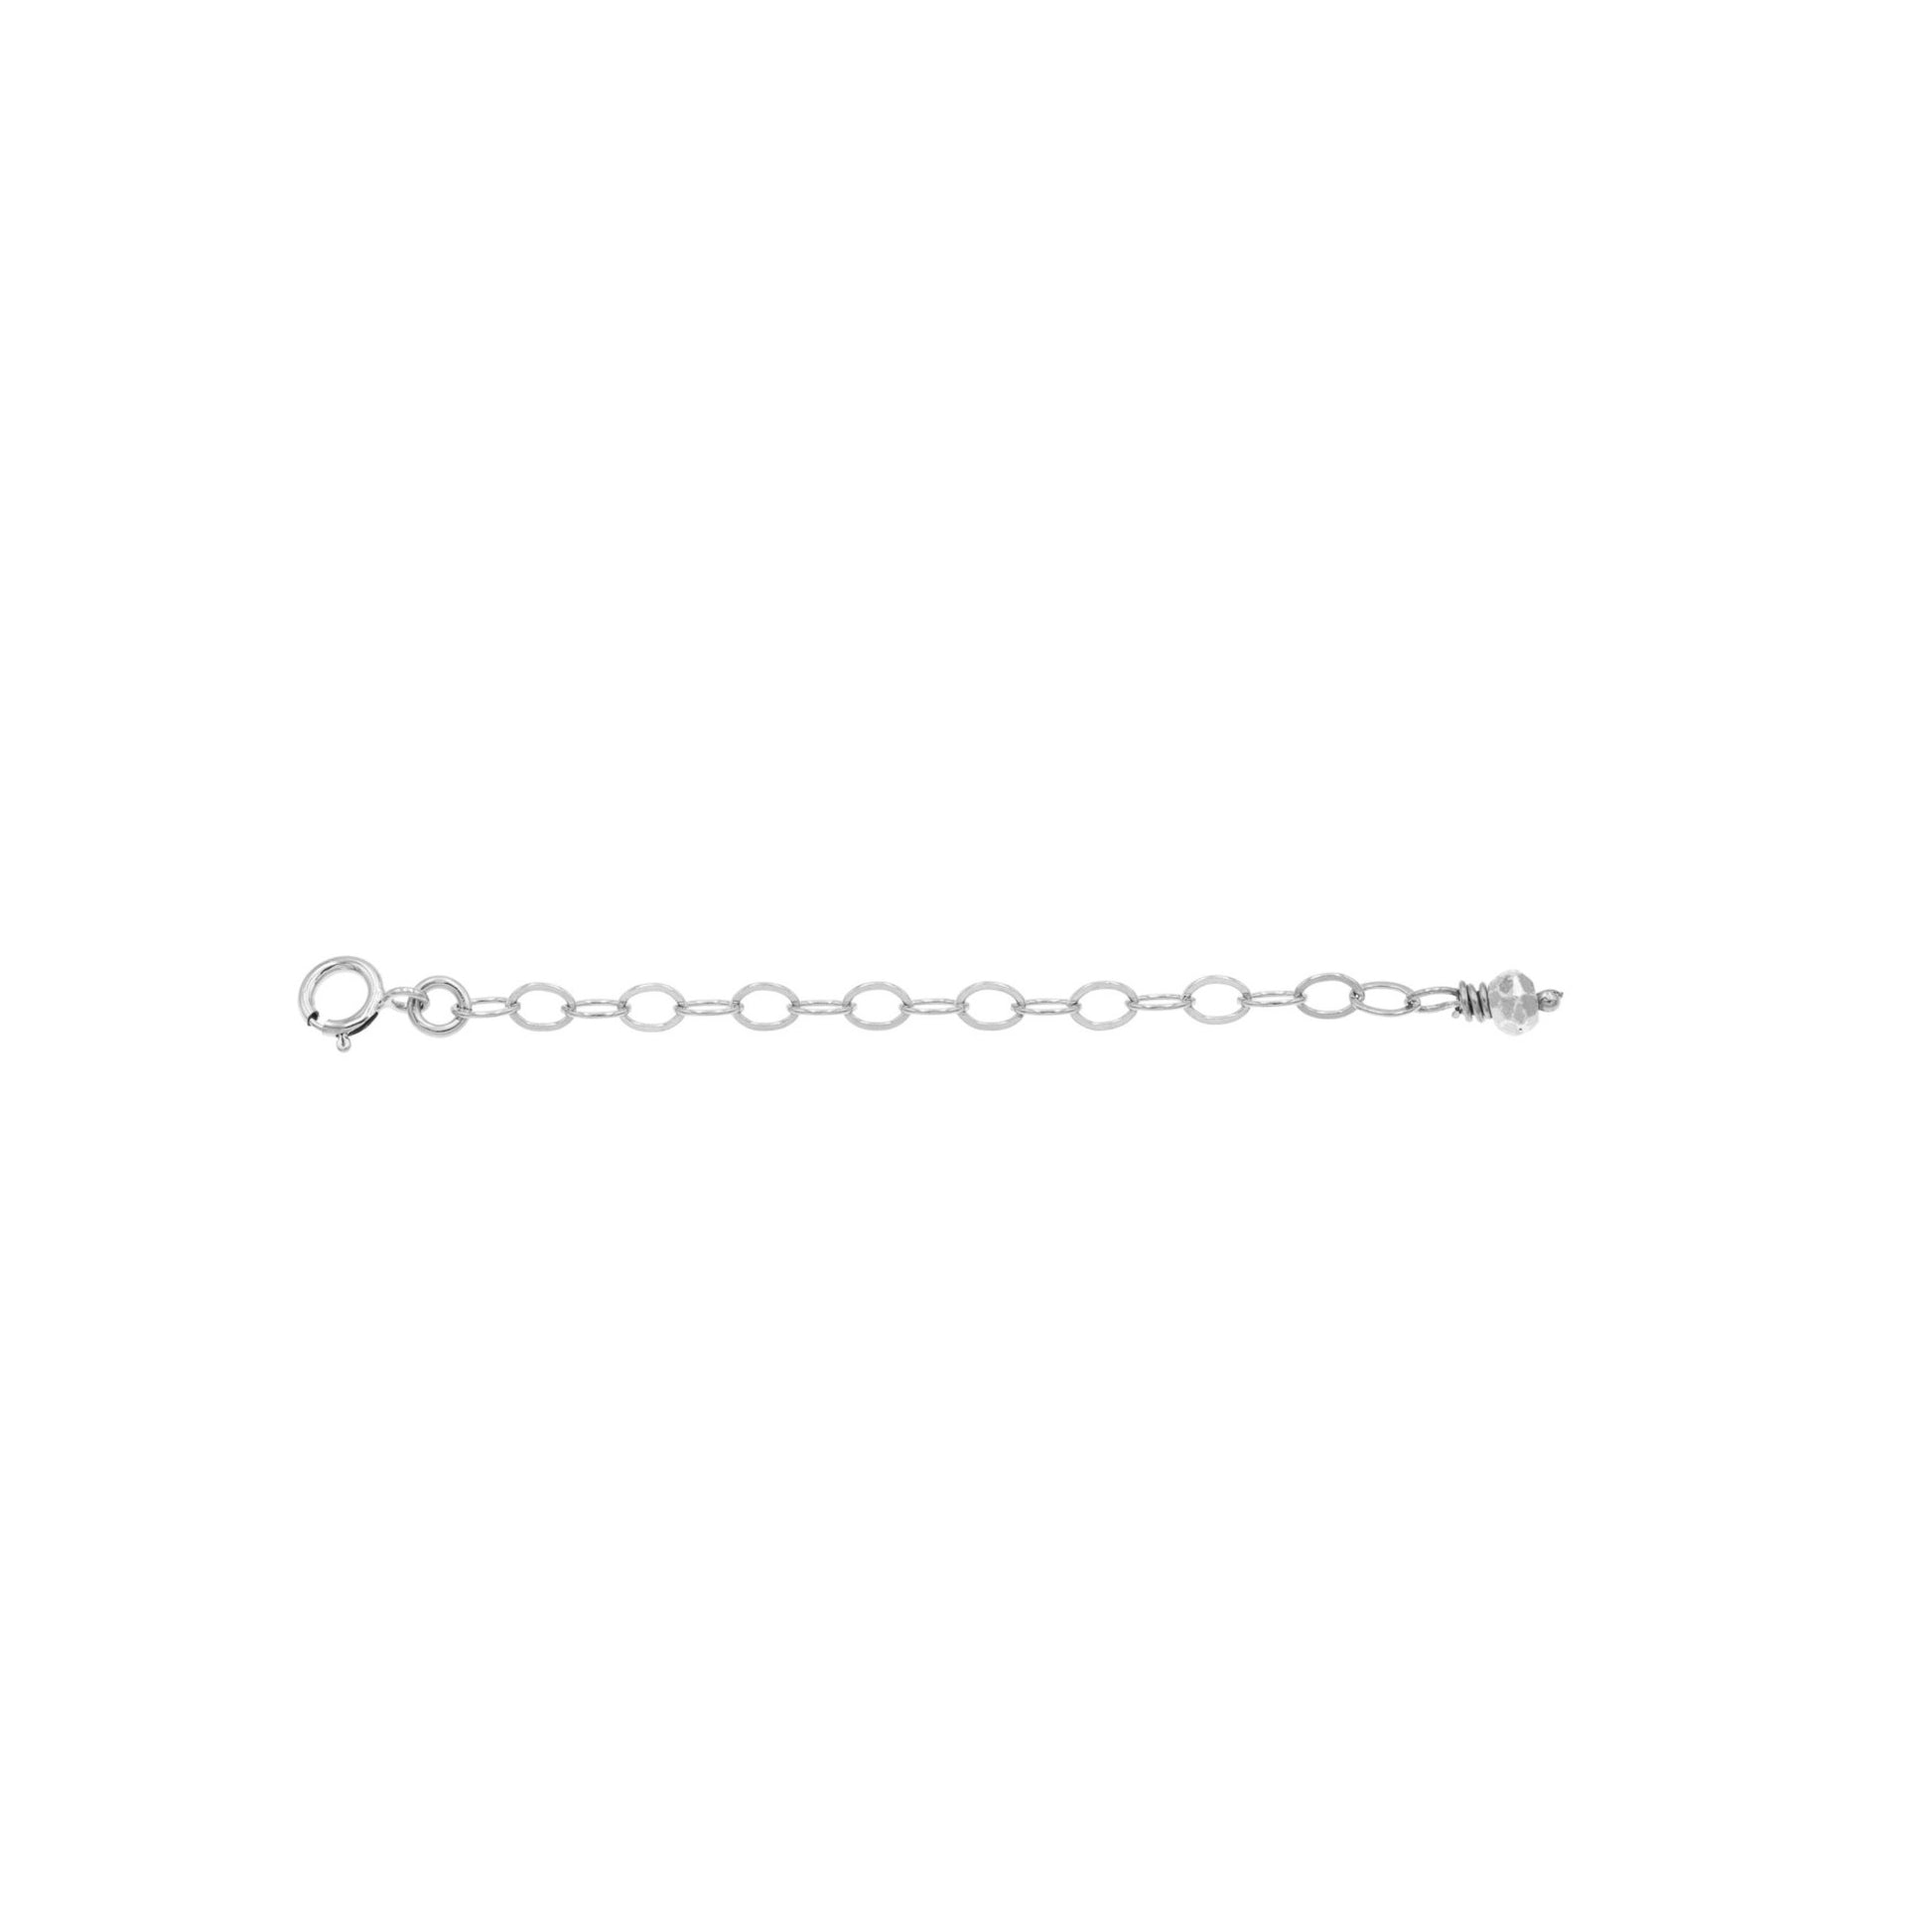 Zurina Ketola Handmade Jewelry Accessories. Sterling Silver Necklace Extender. 65mm / 2.5 on white background